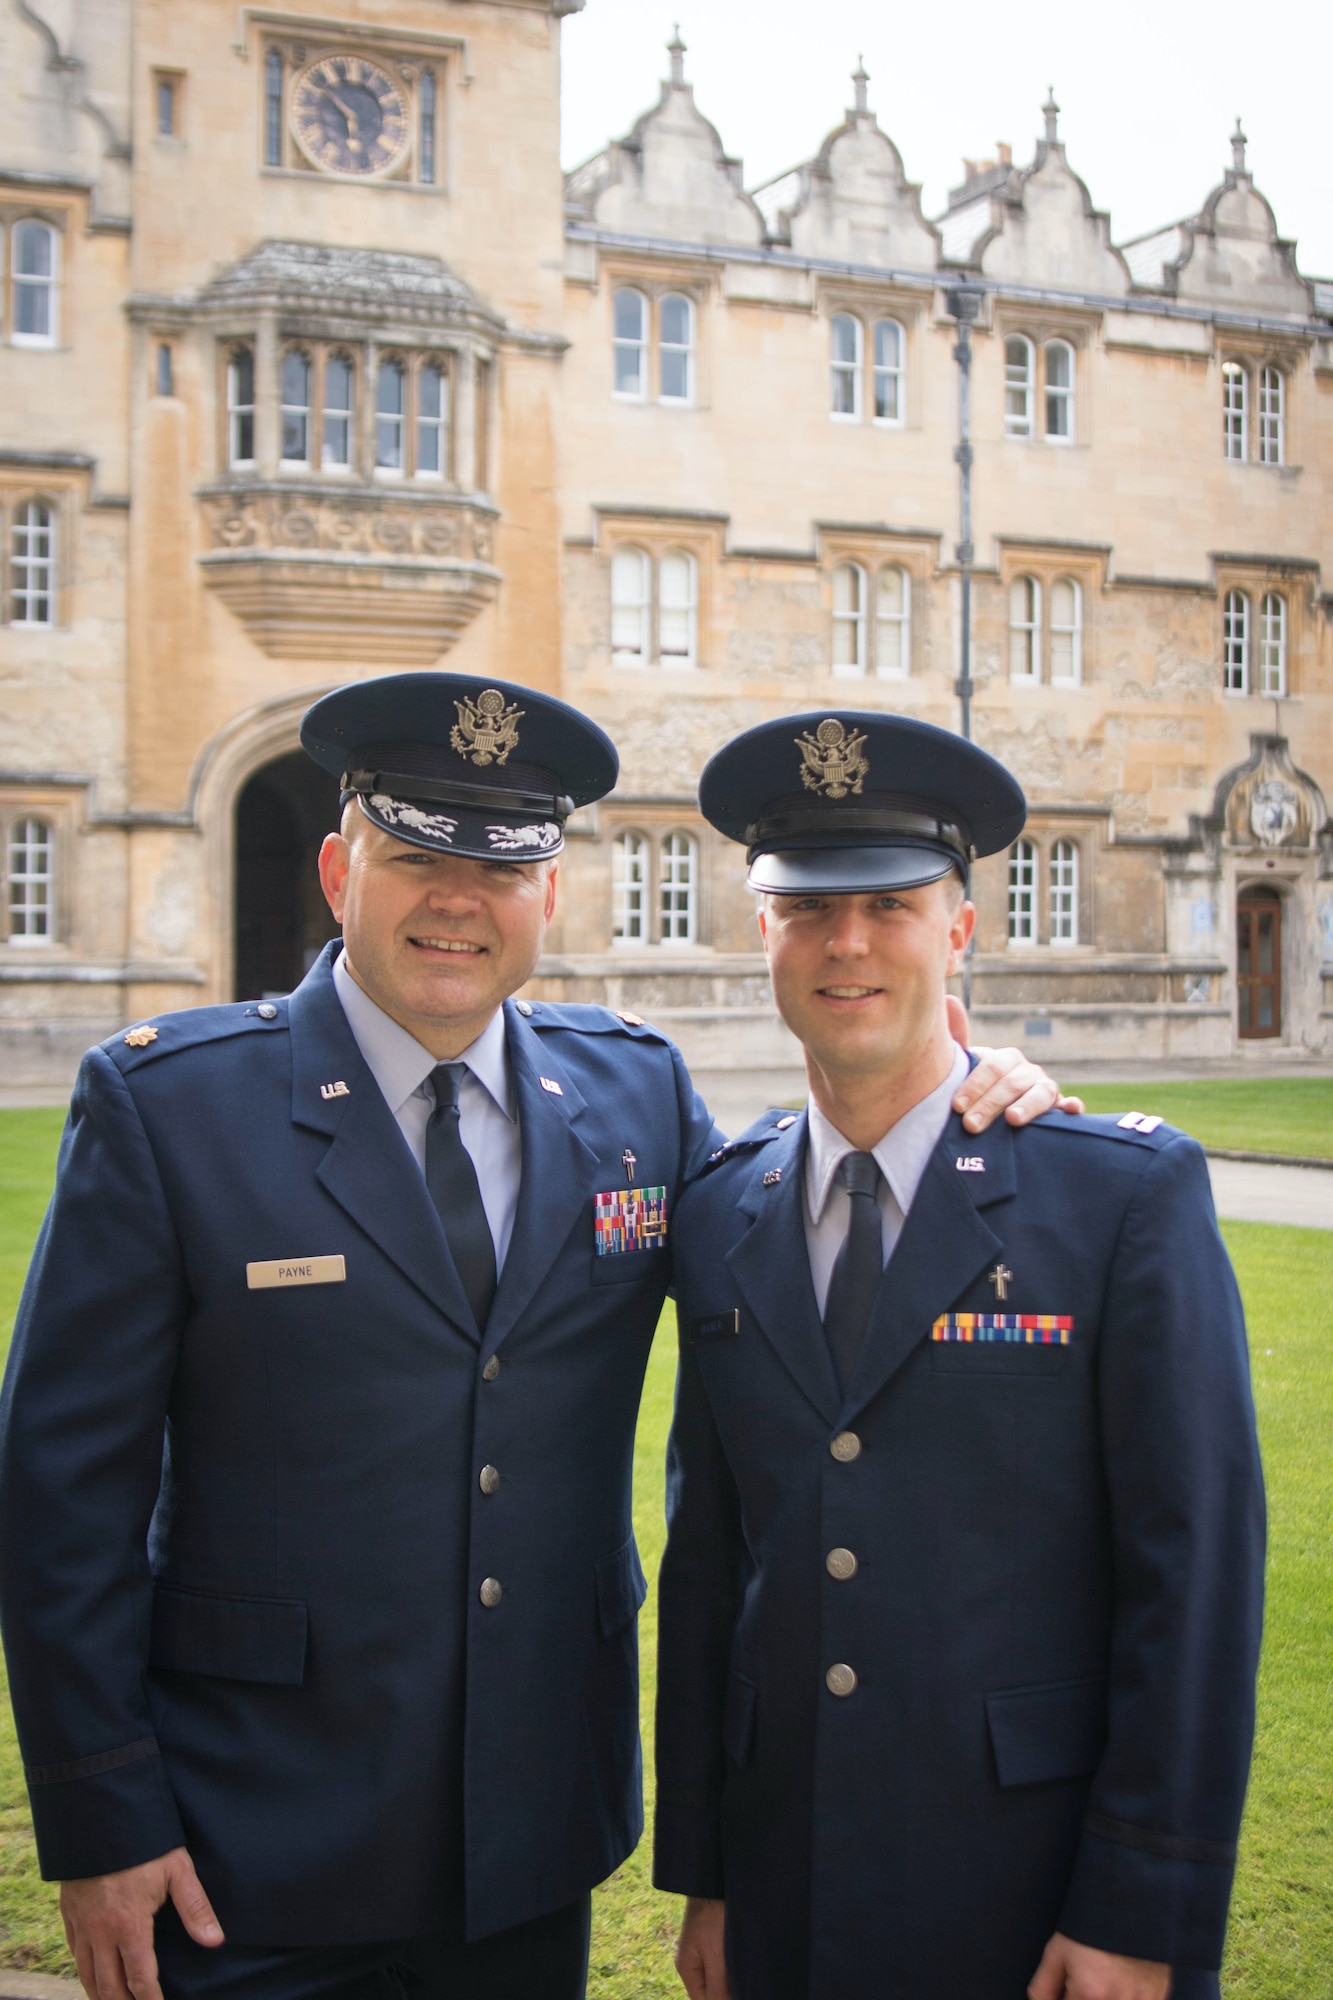 U.S. Air Force Capt. Hans Decker, 501st Combat Support Wing chaplain, poses for a photo with Lt. Col. (then Major) Joshua Payne, 366th Fighter Wing chaplain, at Oriel College, Oxford, England, where Decker is currently a doctoral student in theology. (Courtesy photo)